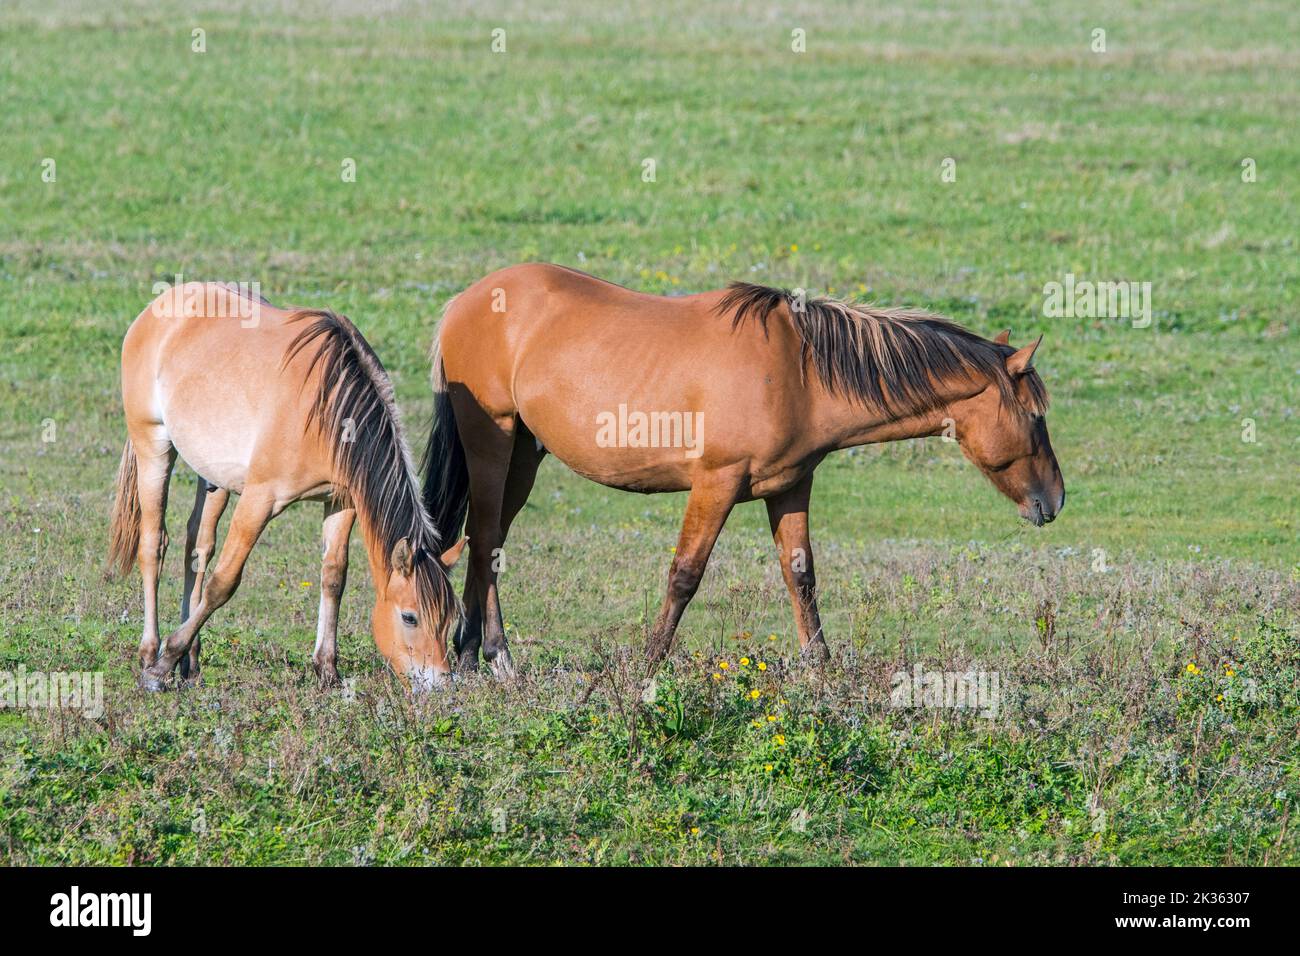 Henson Horses / Cheval de Henson, modern horse breed from northeast France at the Marquenterre park, Bay of the Somme, Hauts-de-France Stock Photo